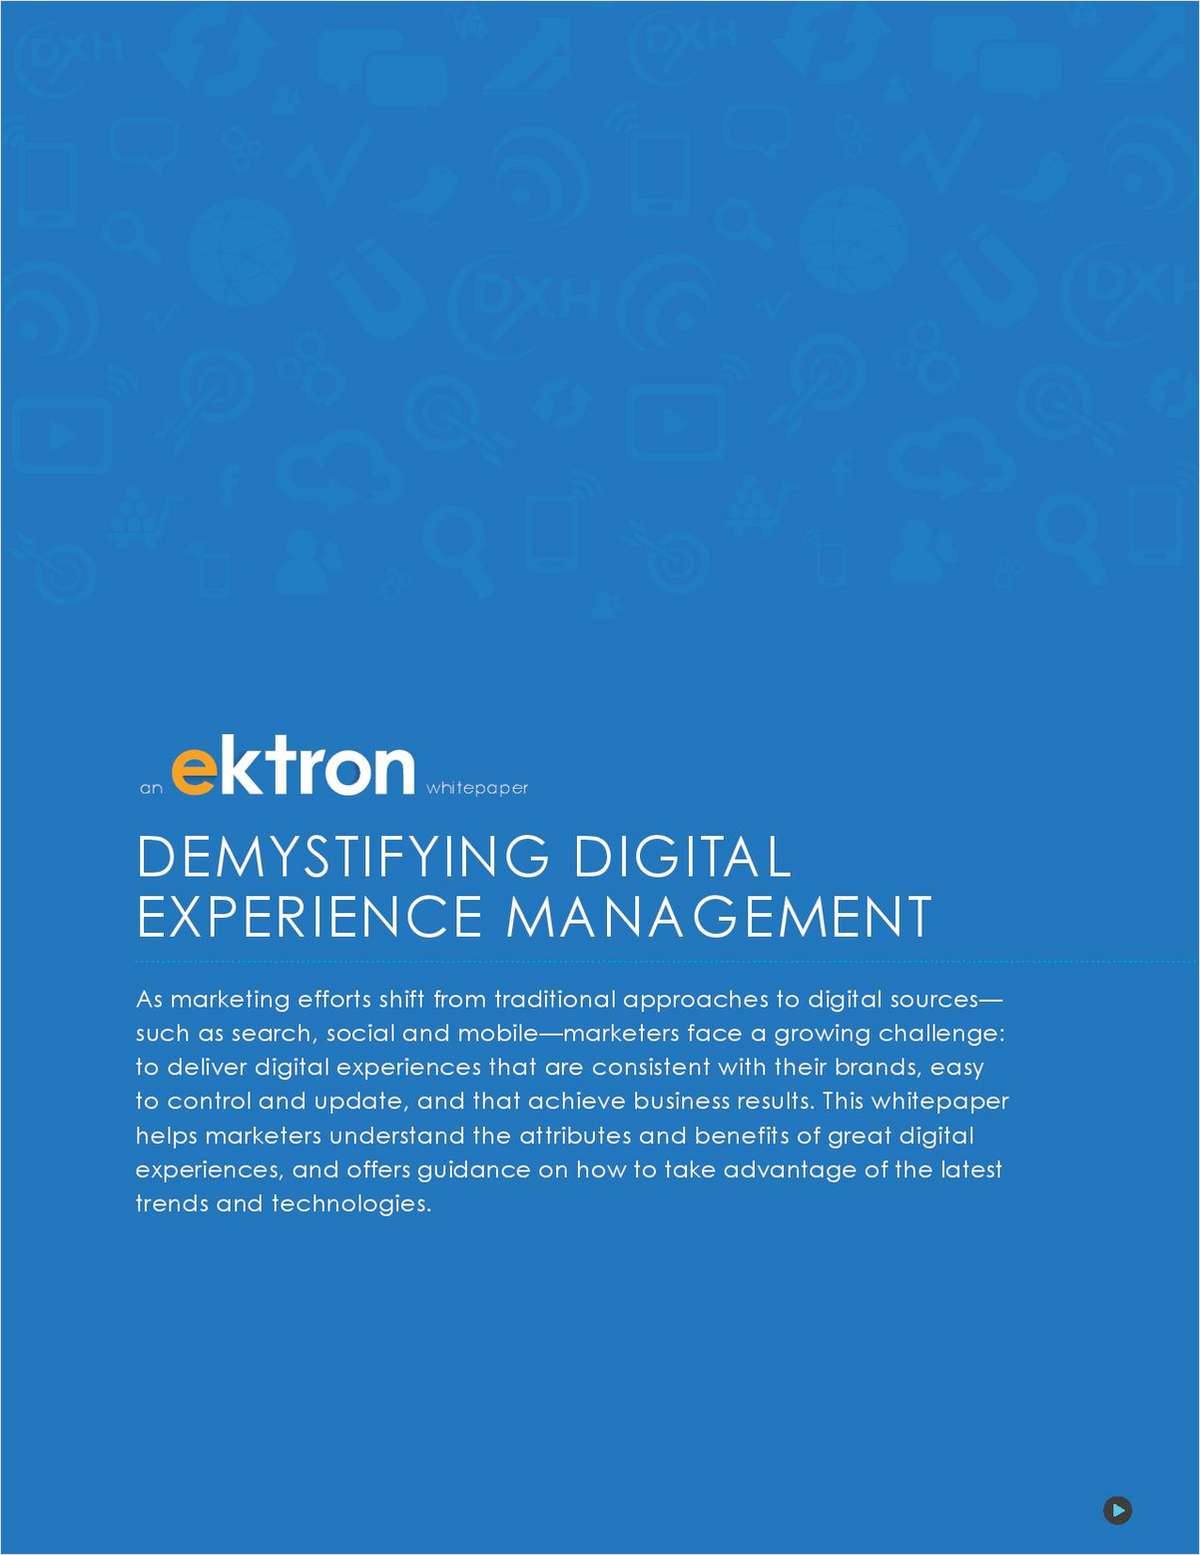 Understand the Elements of a Great Digital Experience